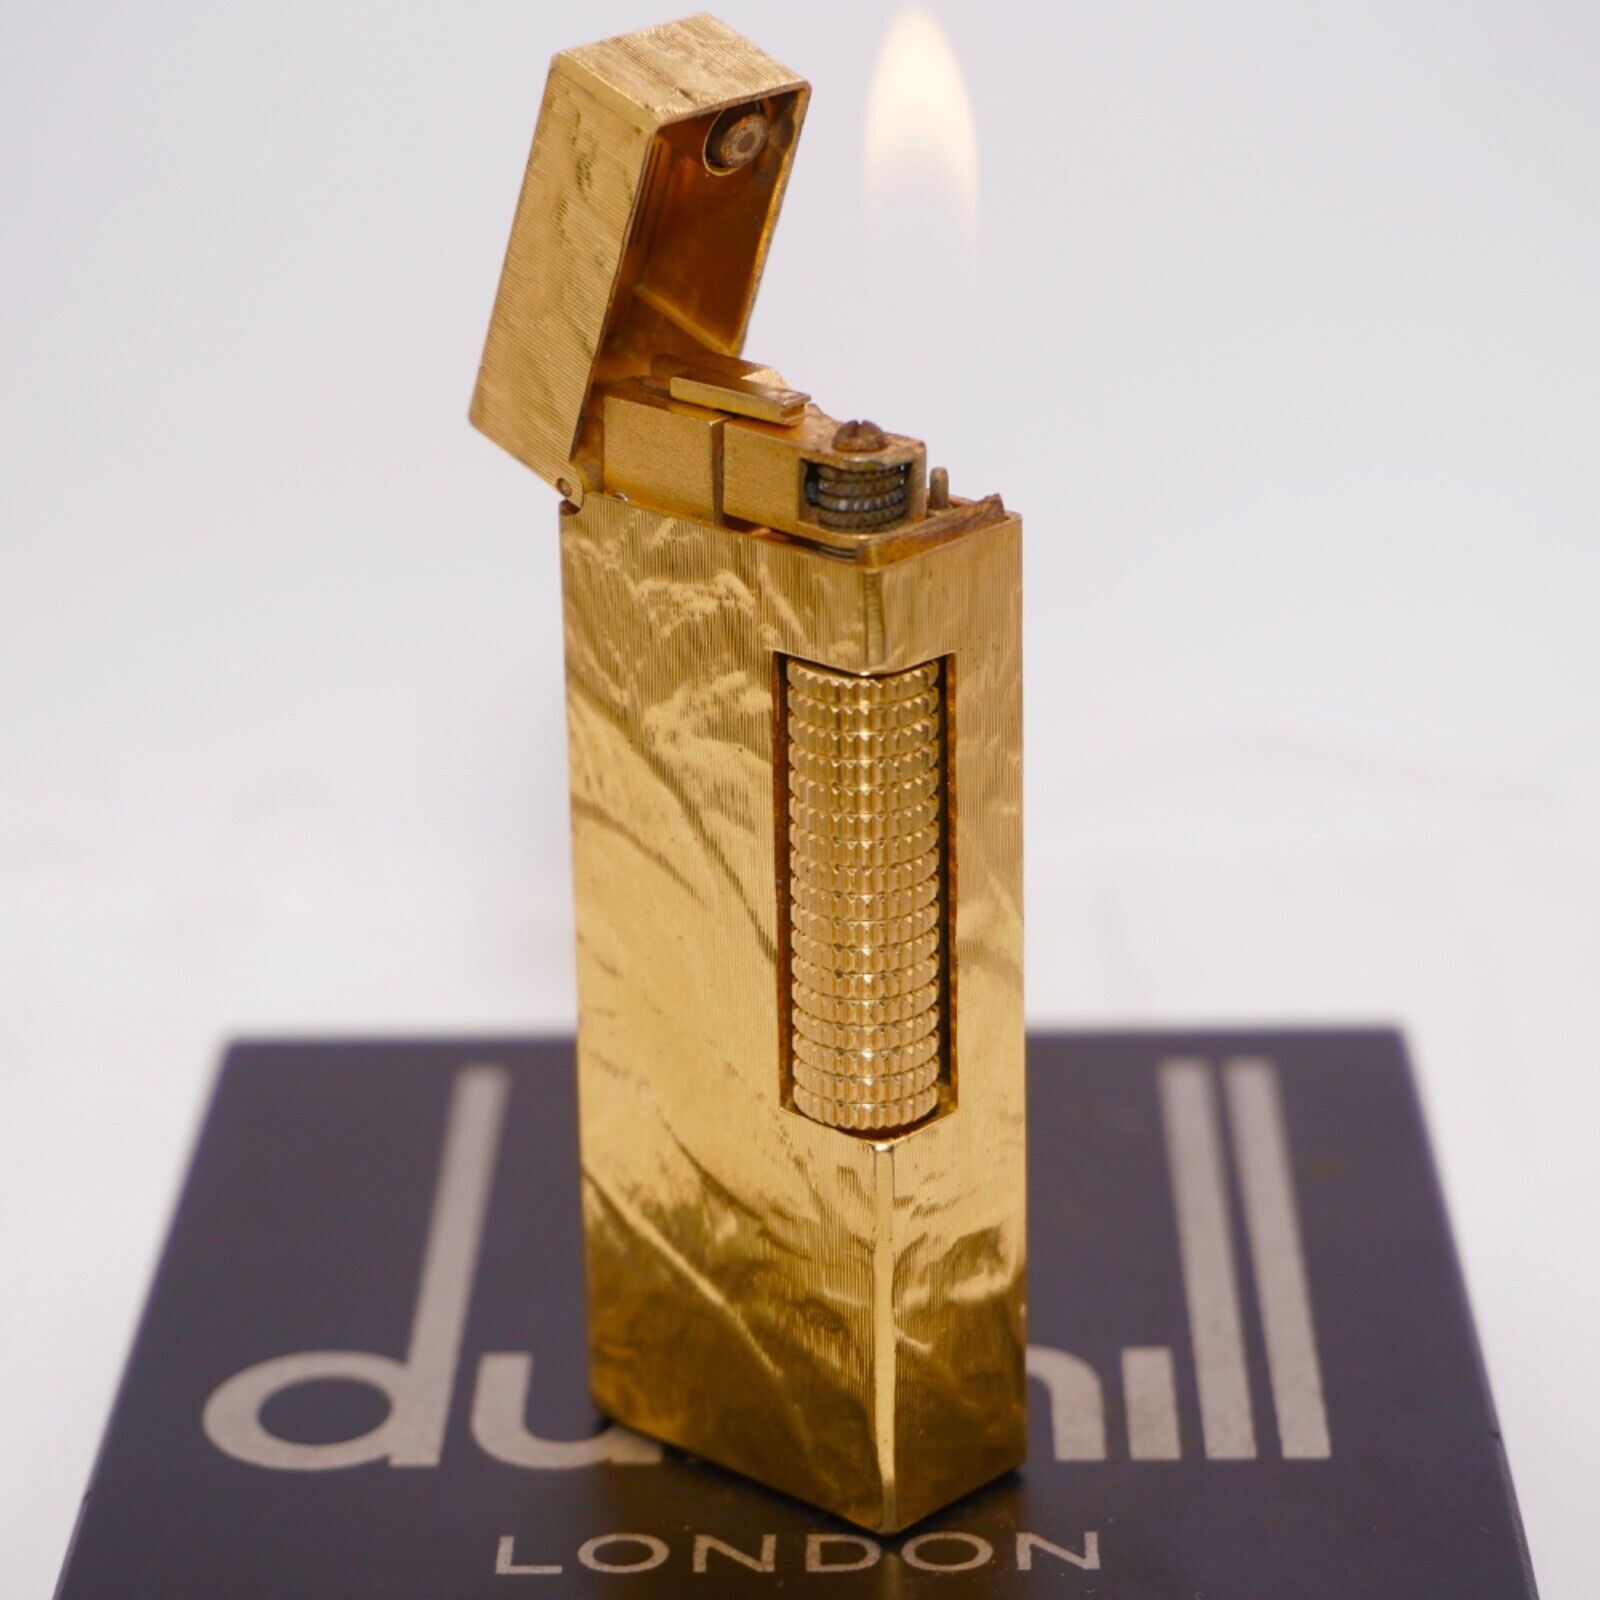 With D Mark Dunhill Lighter Gold plate Silk Moire Pattern_Ultrasonically cleaned